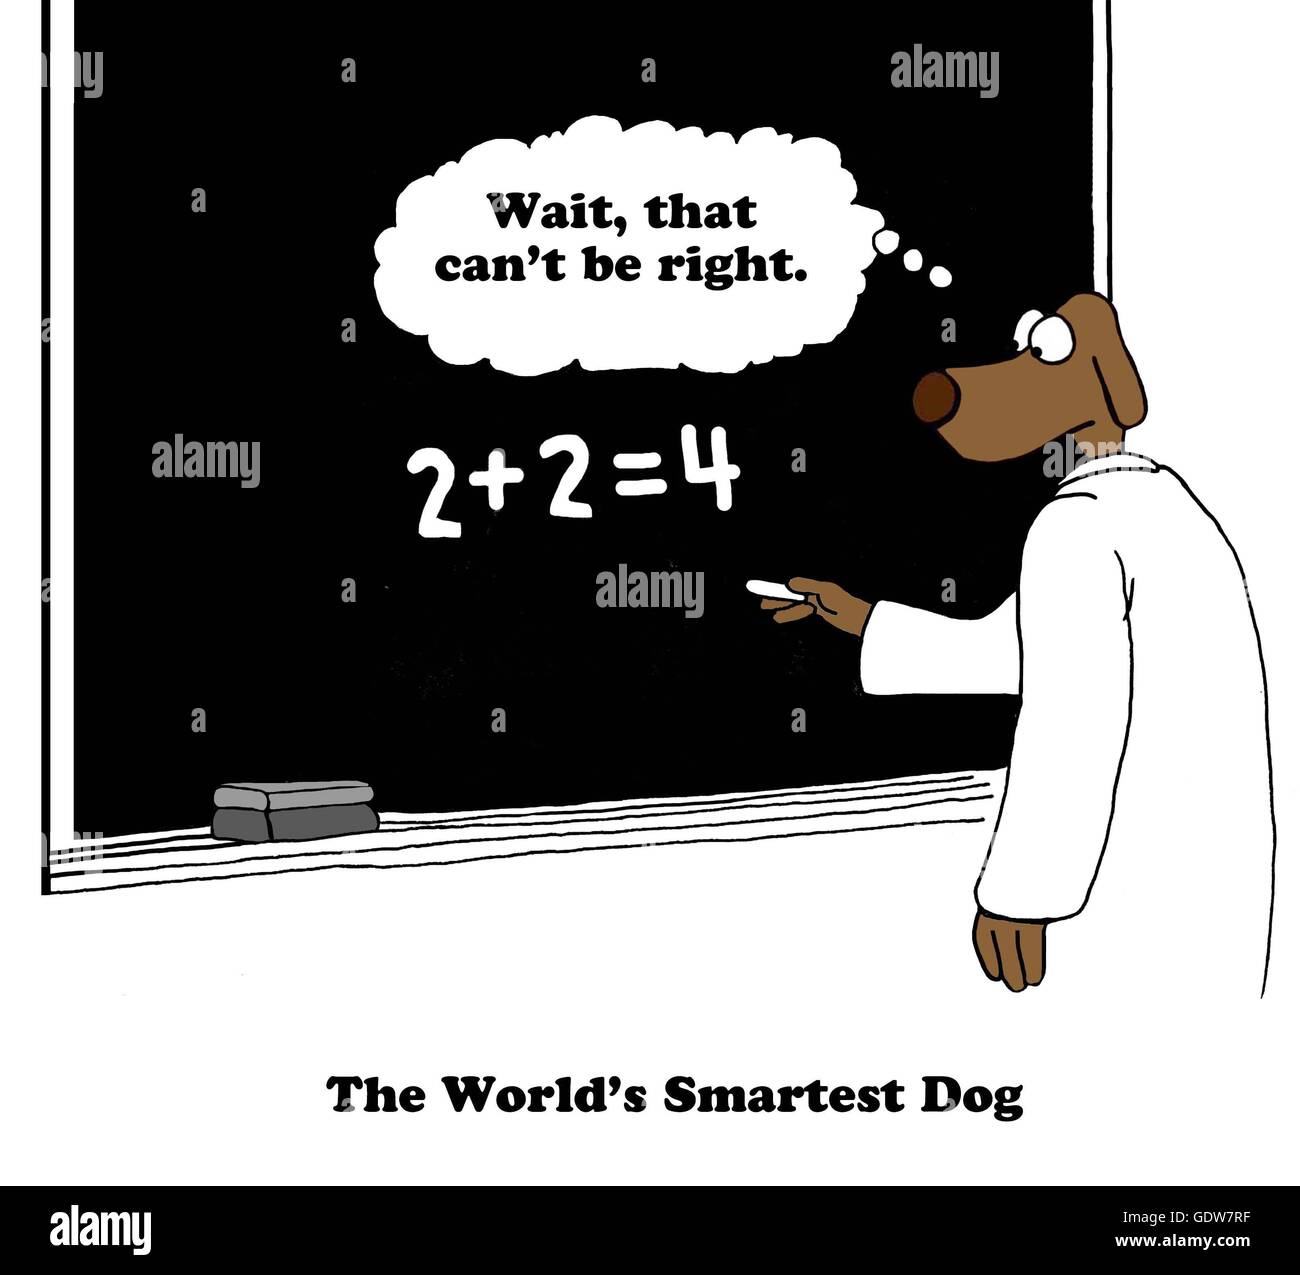 Cartoon about the world's smartest dog. Stock Photo